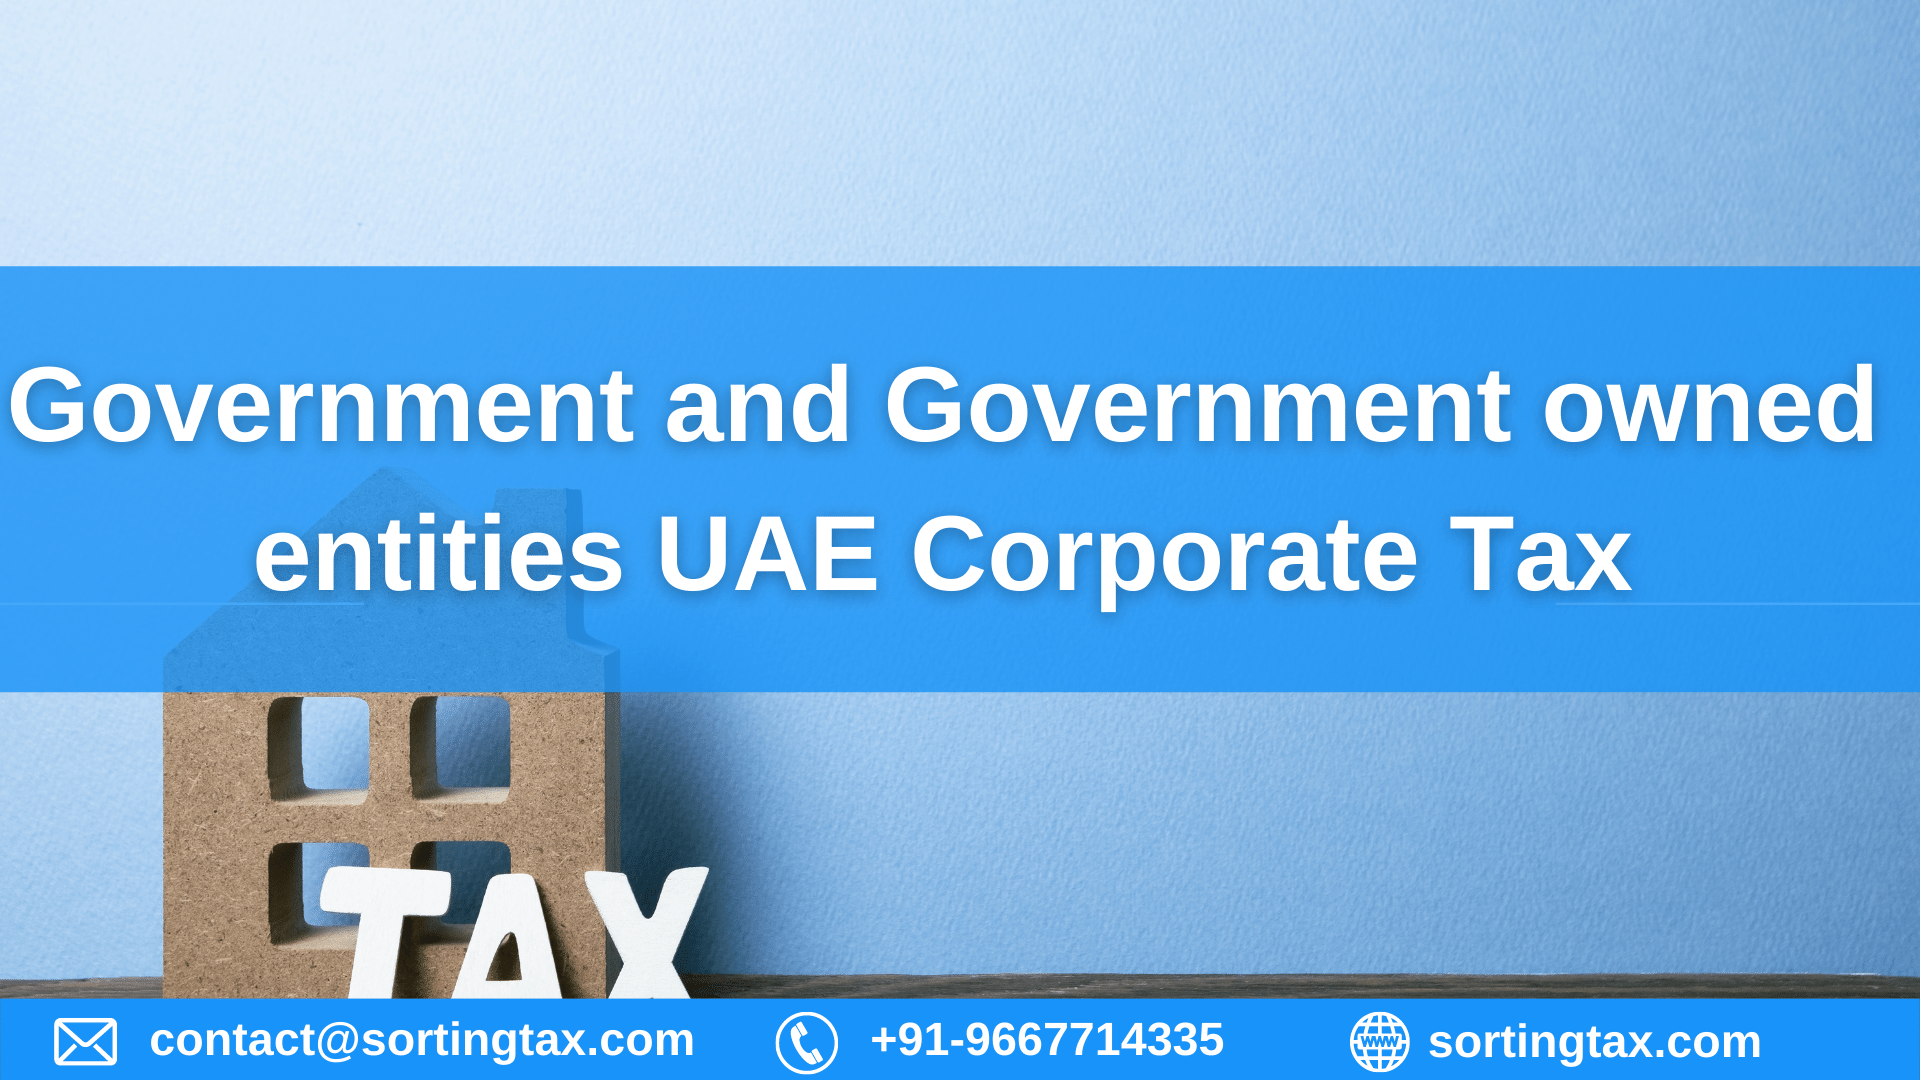 Government and Government owned entities UAE Corporate Tax